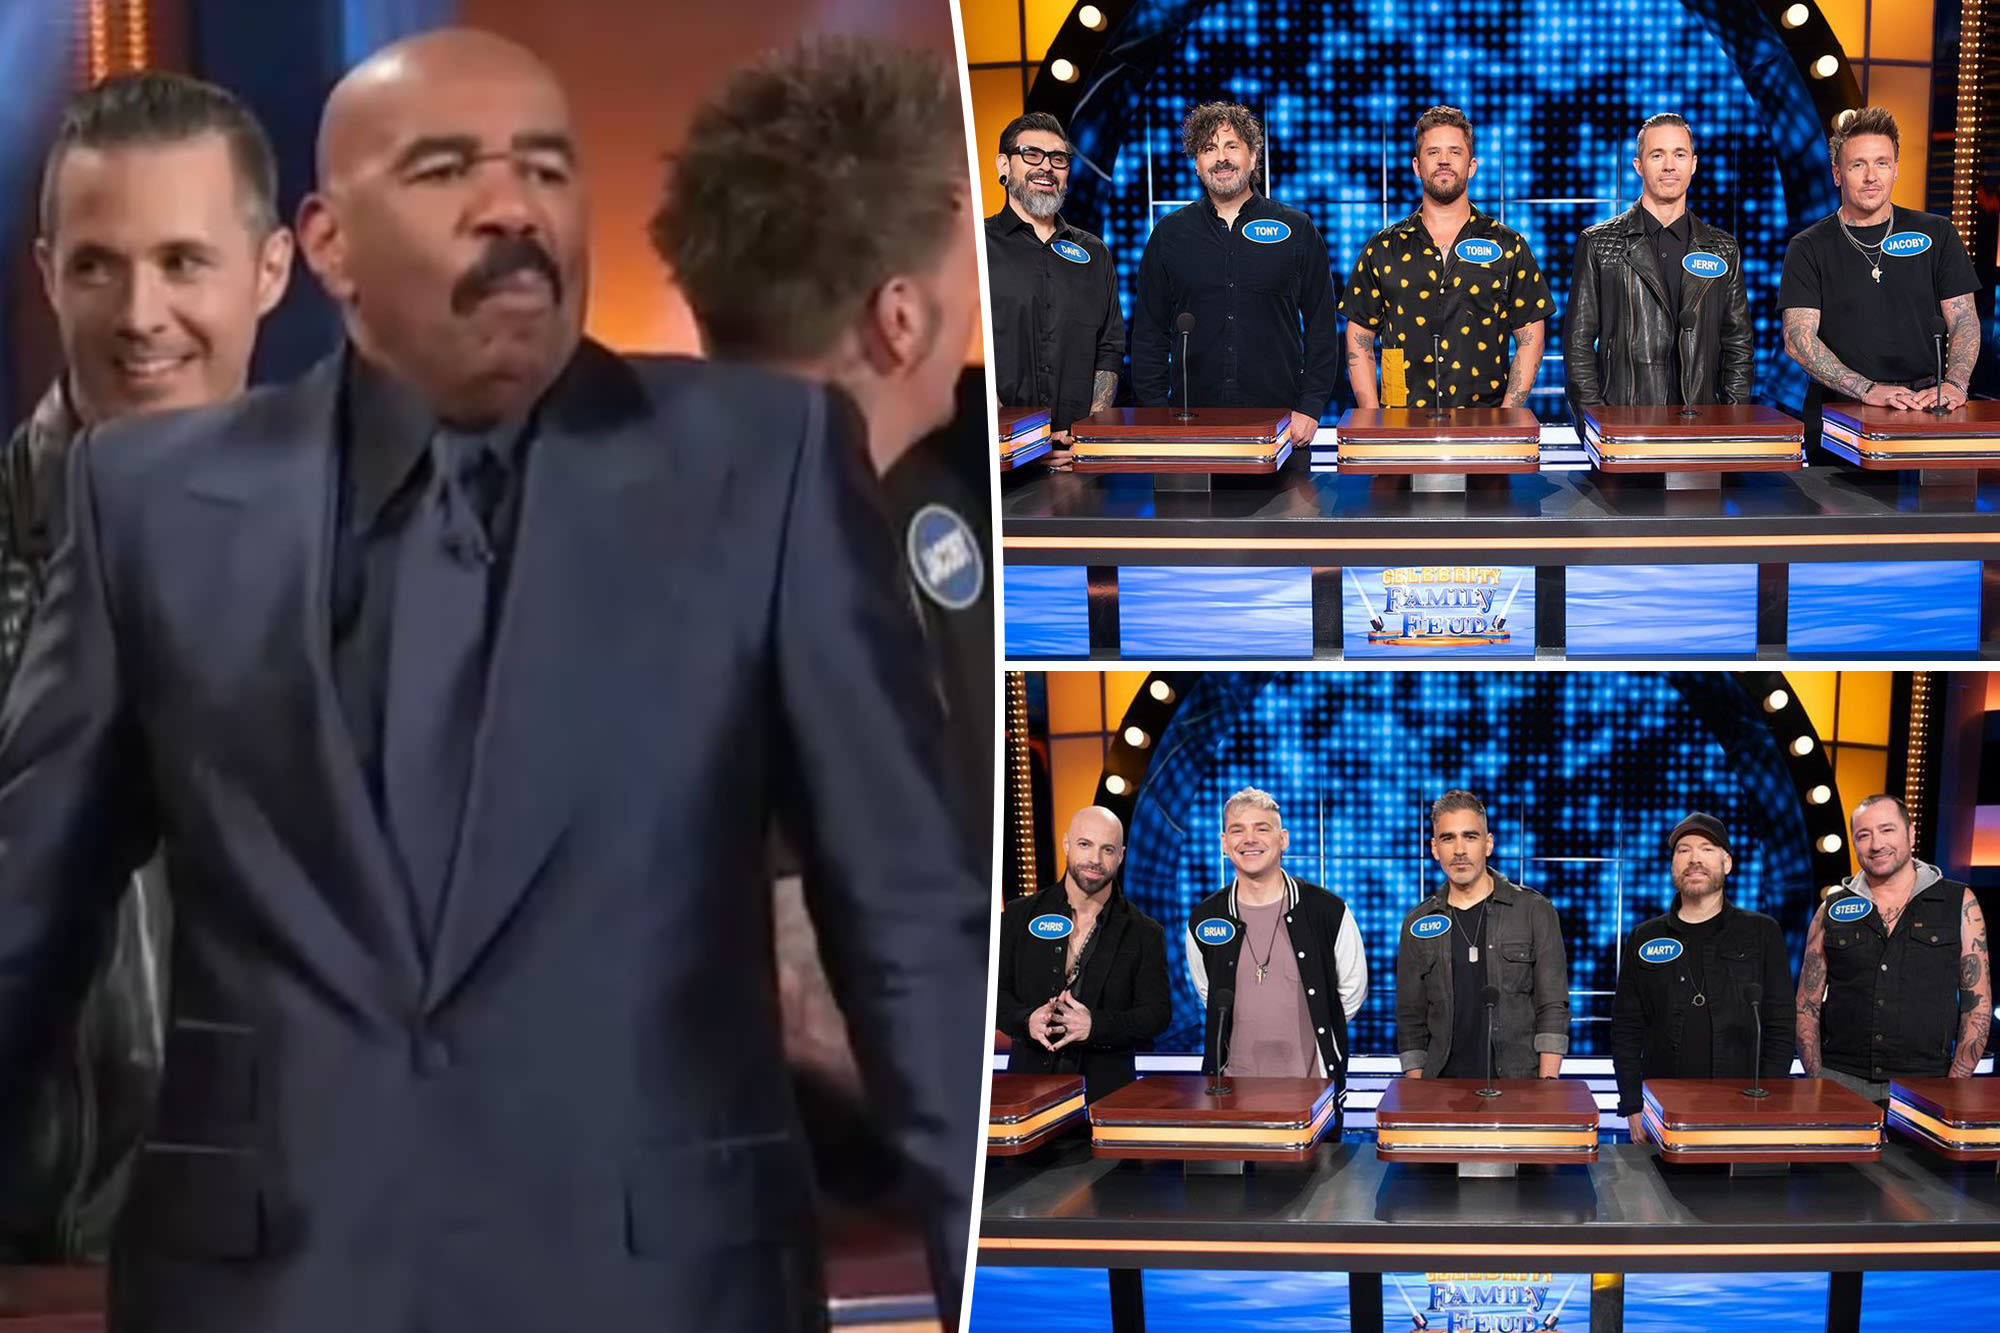 Steve Harvey repeats racy ‘Celebrity Family Feud’ answer he’s never said before